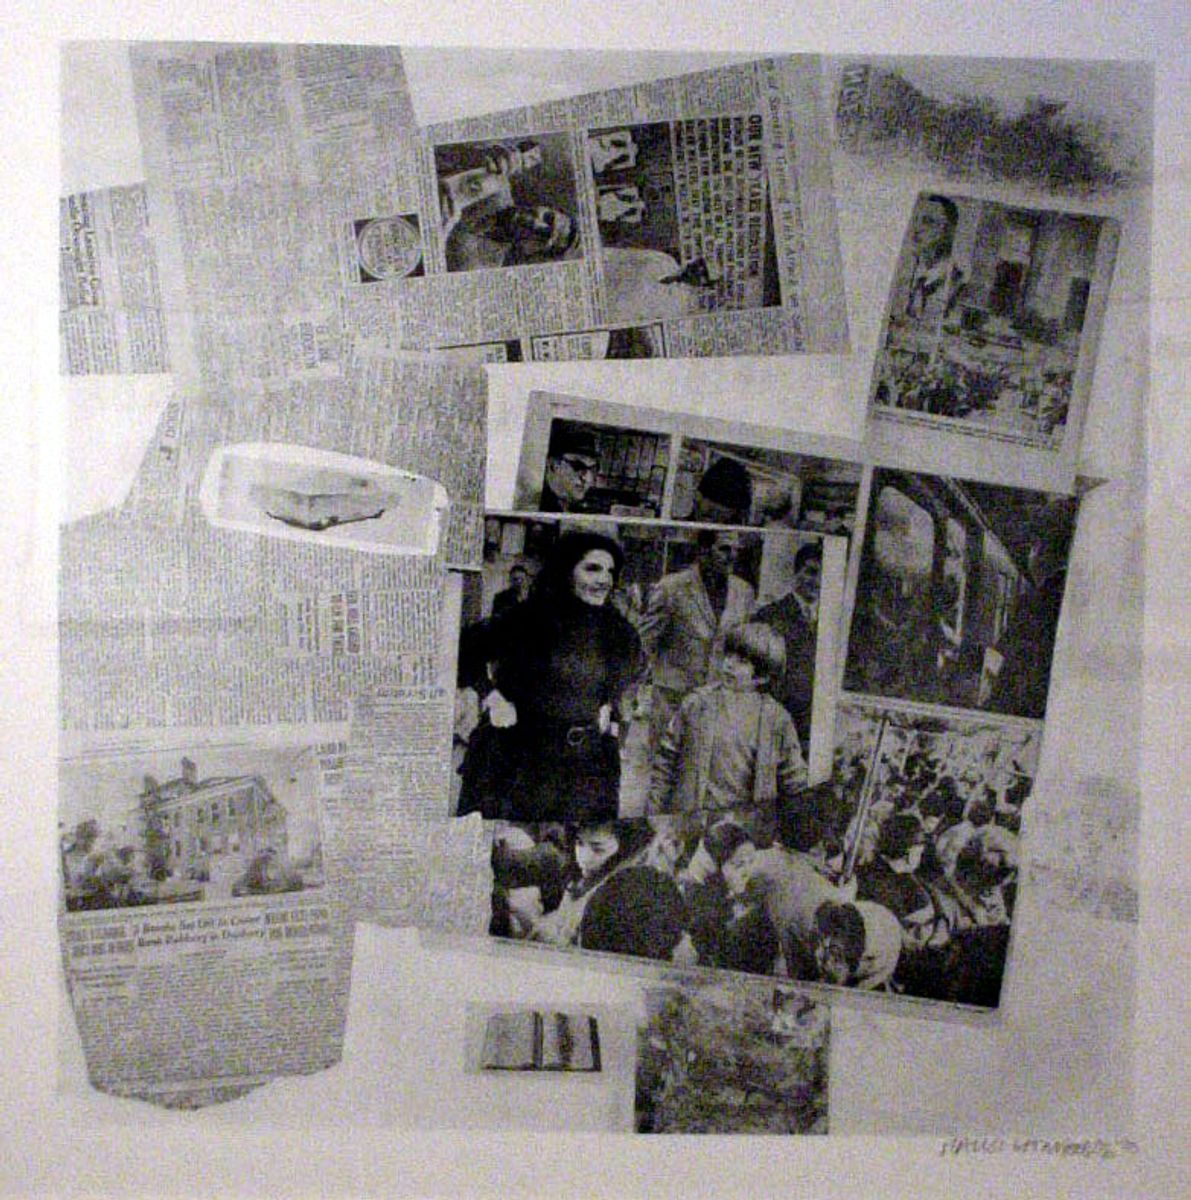 Licensed by Artists Rights Society (ARS) New York, NY http://www.arsny.com/
© Robert Rauschenberg Foundation 
https://www.rauschenbergfoundation.org/
Photography by Todd Stailey